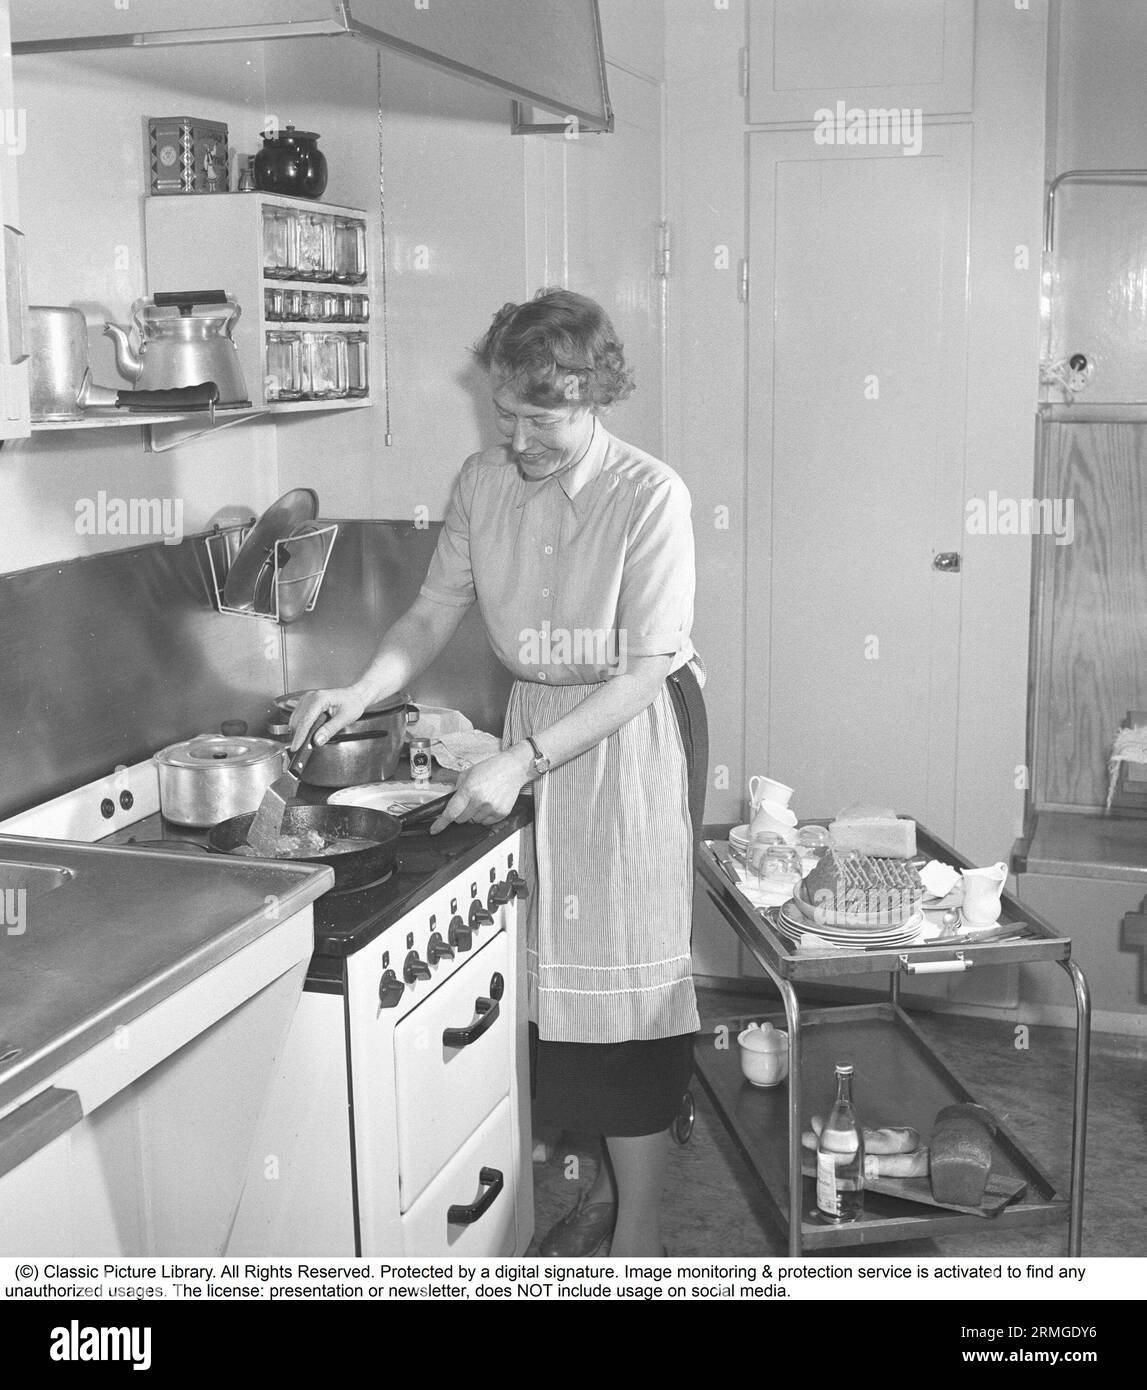 In the kitchen 1950s. Interior of a kitchen and a woman standing at the kitchen cooker frying something in the frying pan. She is wearing a apron.  Sweden 1952. Kristoffersson ref BF82-9 Stock Photo